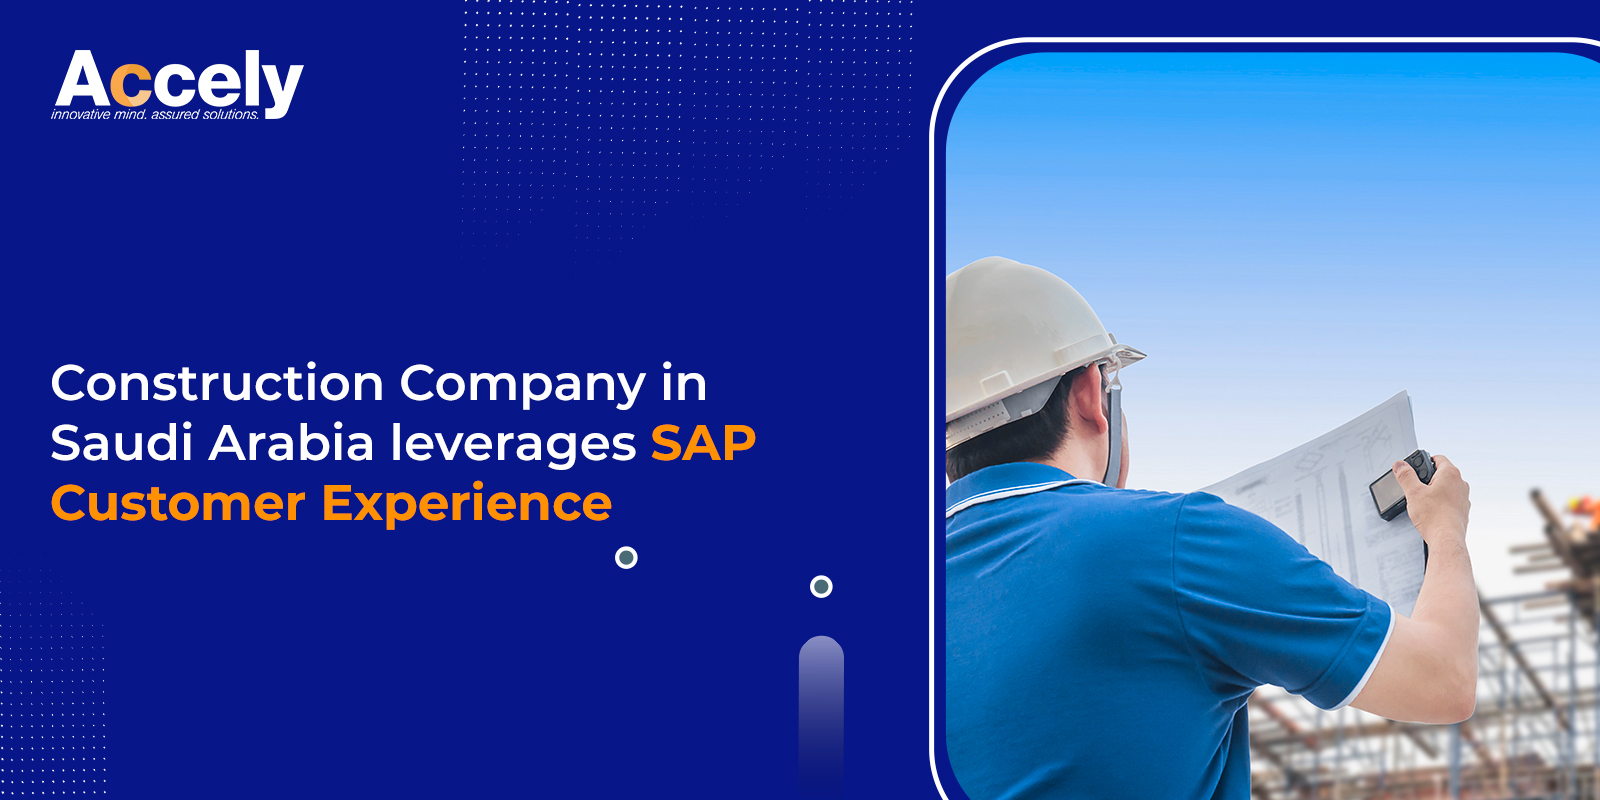 Construction Company in Saudi Arabia leverages SAP Customer Experience